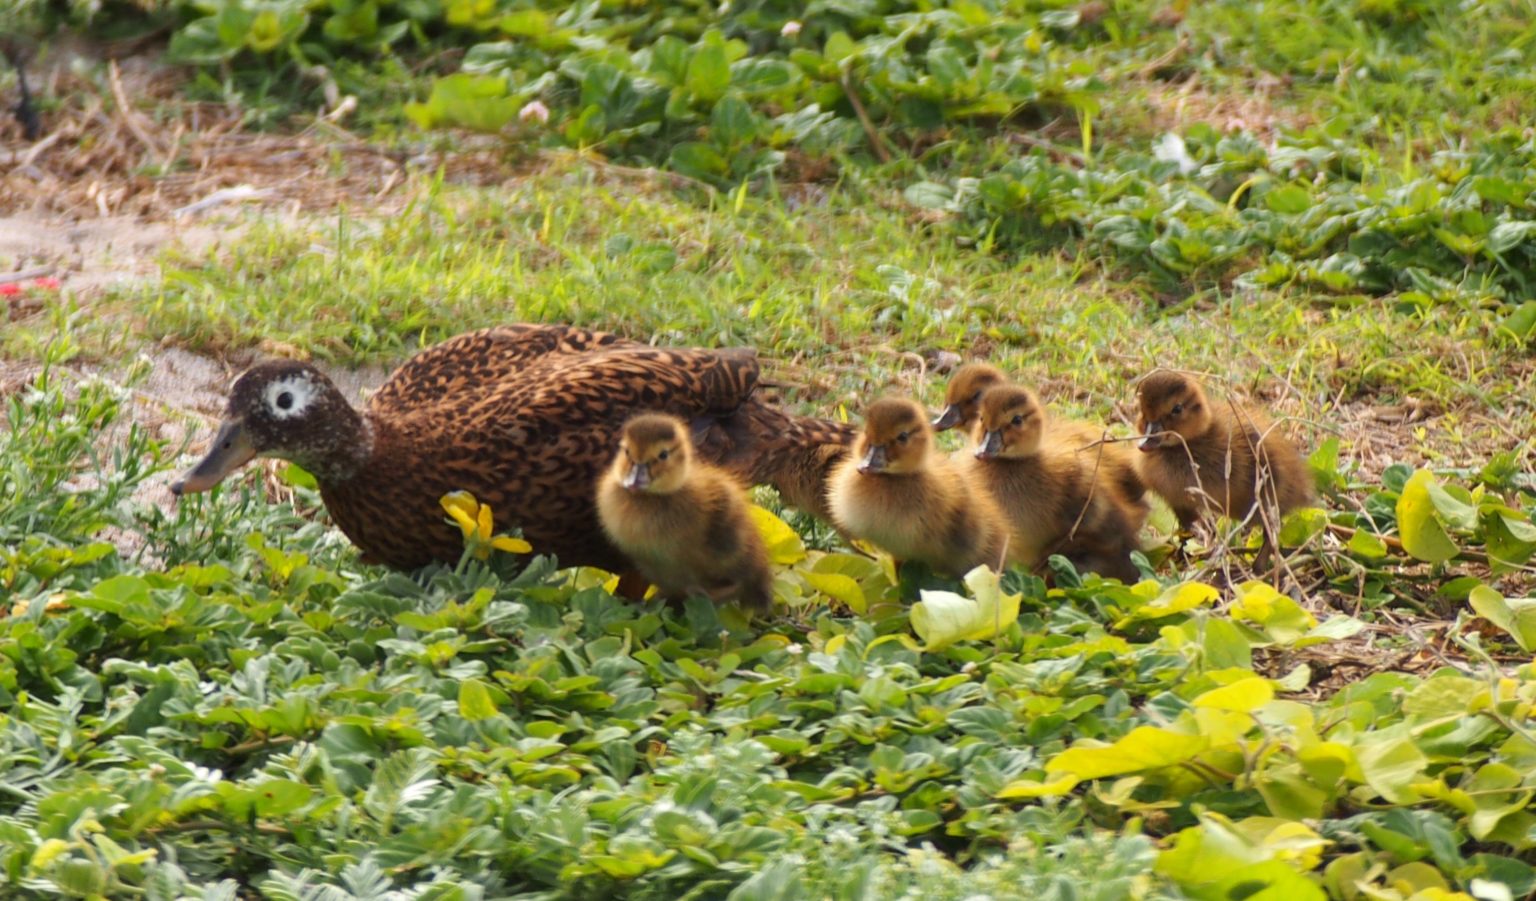 A Laysan duck with her offspring.